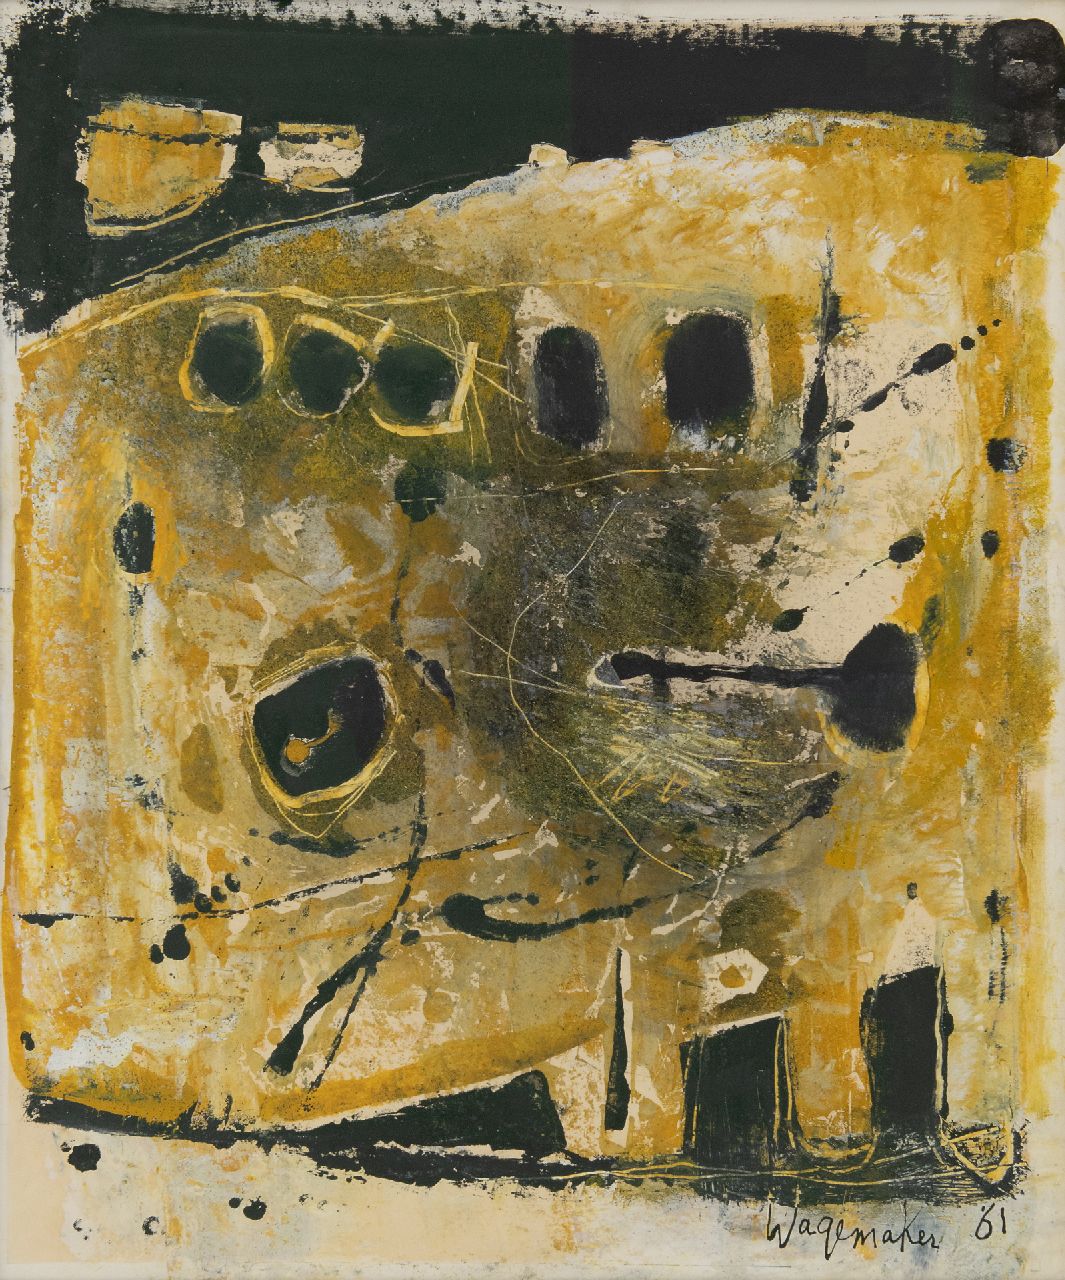 Wagemaker A.B.  | Adriaan Barend 'Jaap' Wagemaker, Abstract in yellow and black, mixed media on paper 54.0 x 44.5 cm, signed l.r. and dated '61